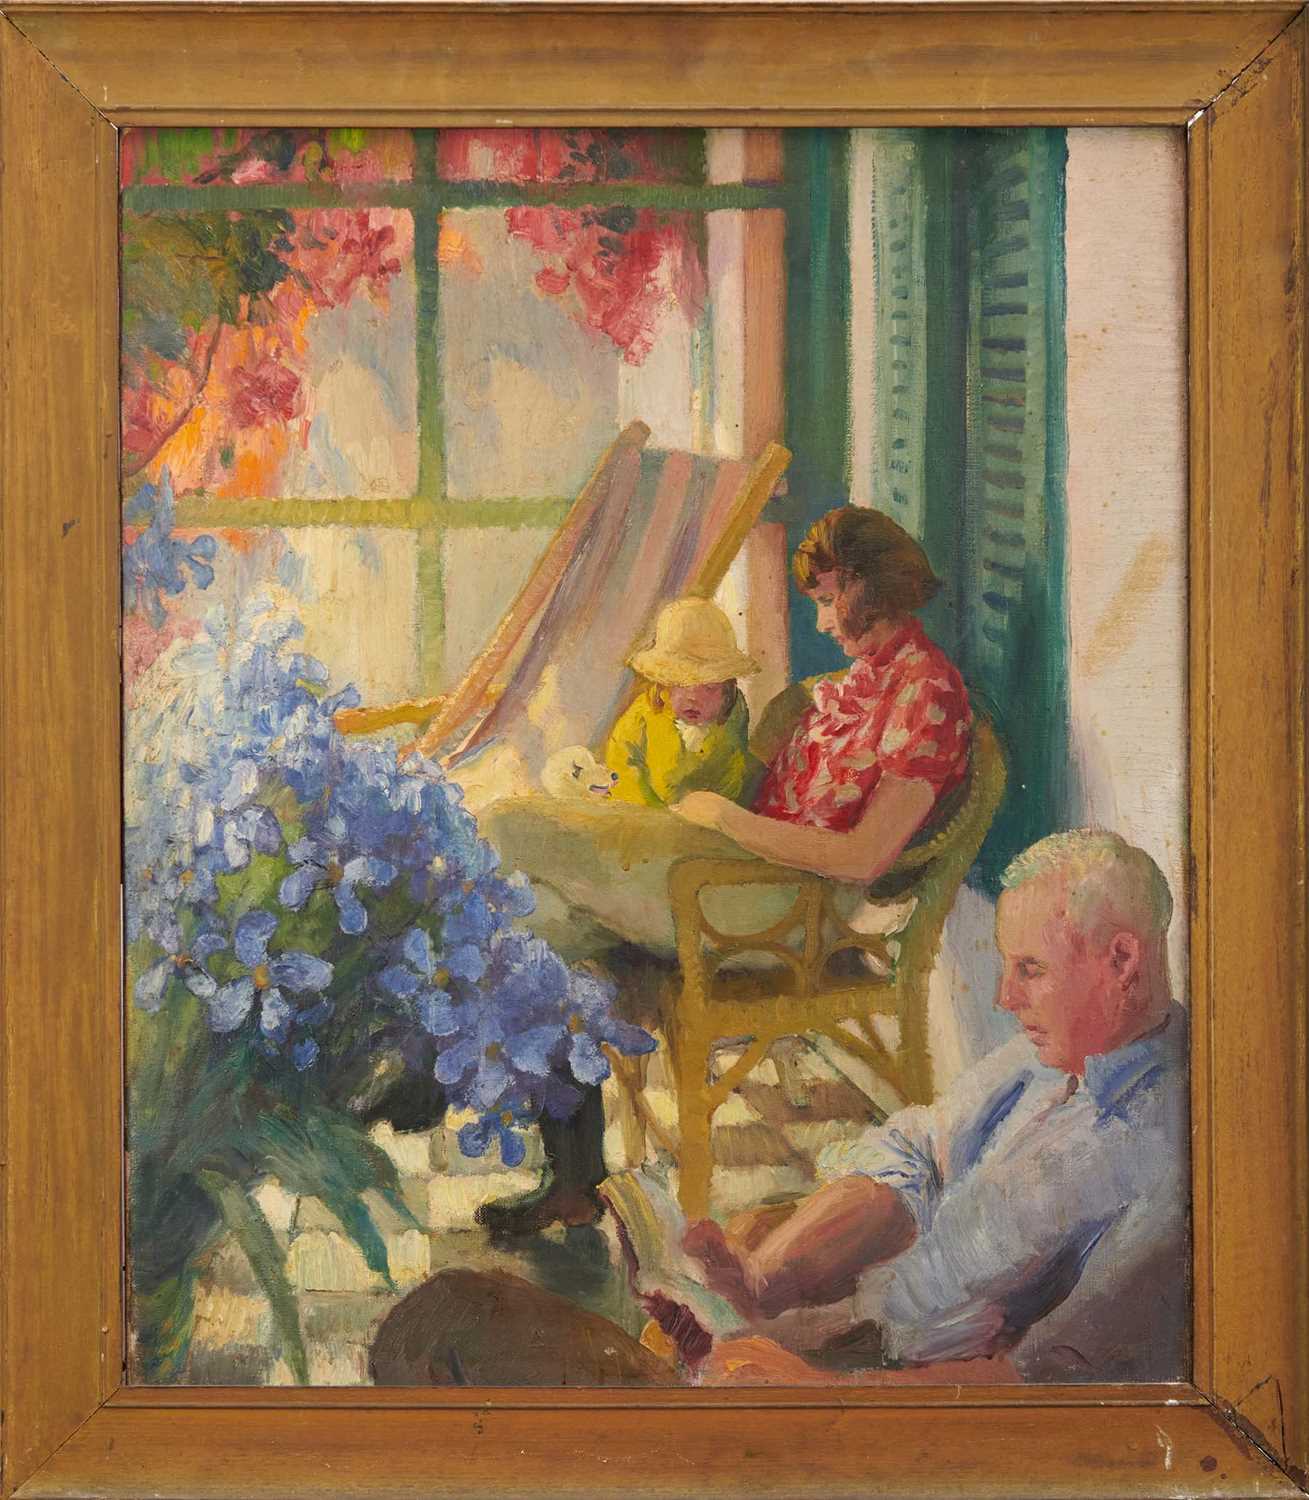 *Gerald Spencer Pryse (1882-1956) oil on canvas, The Artist's family in an interior, 78 x 61cm, fram